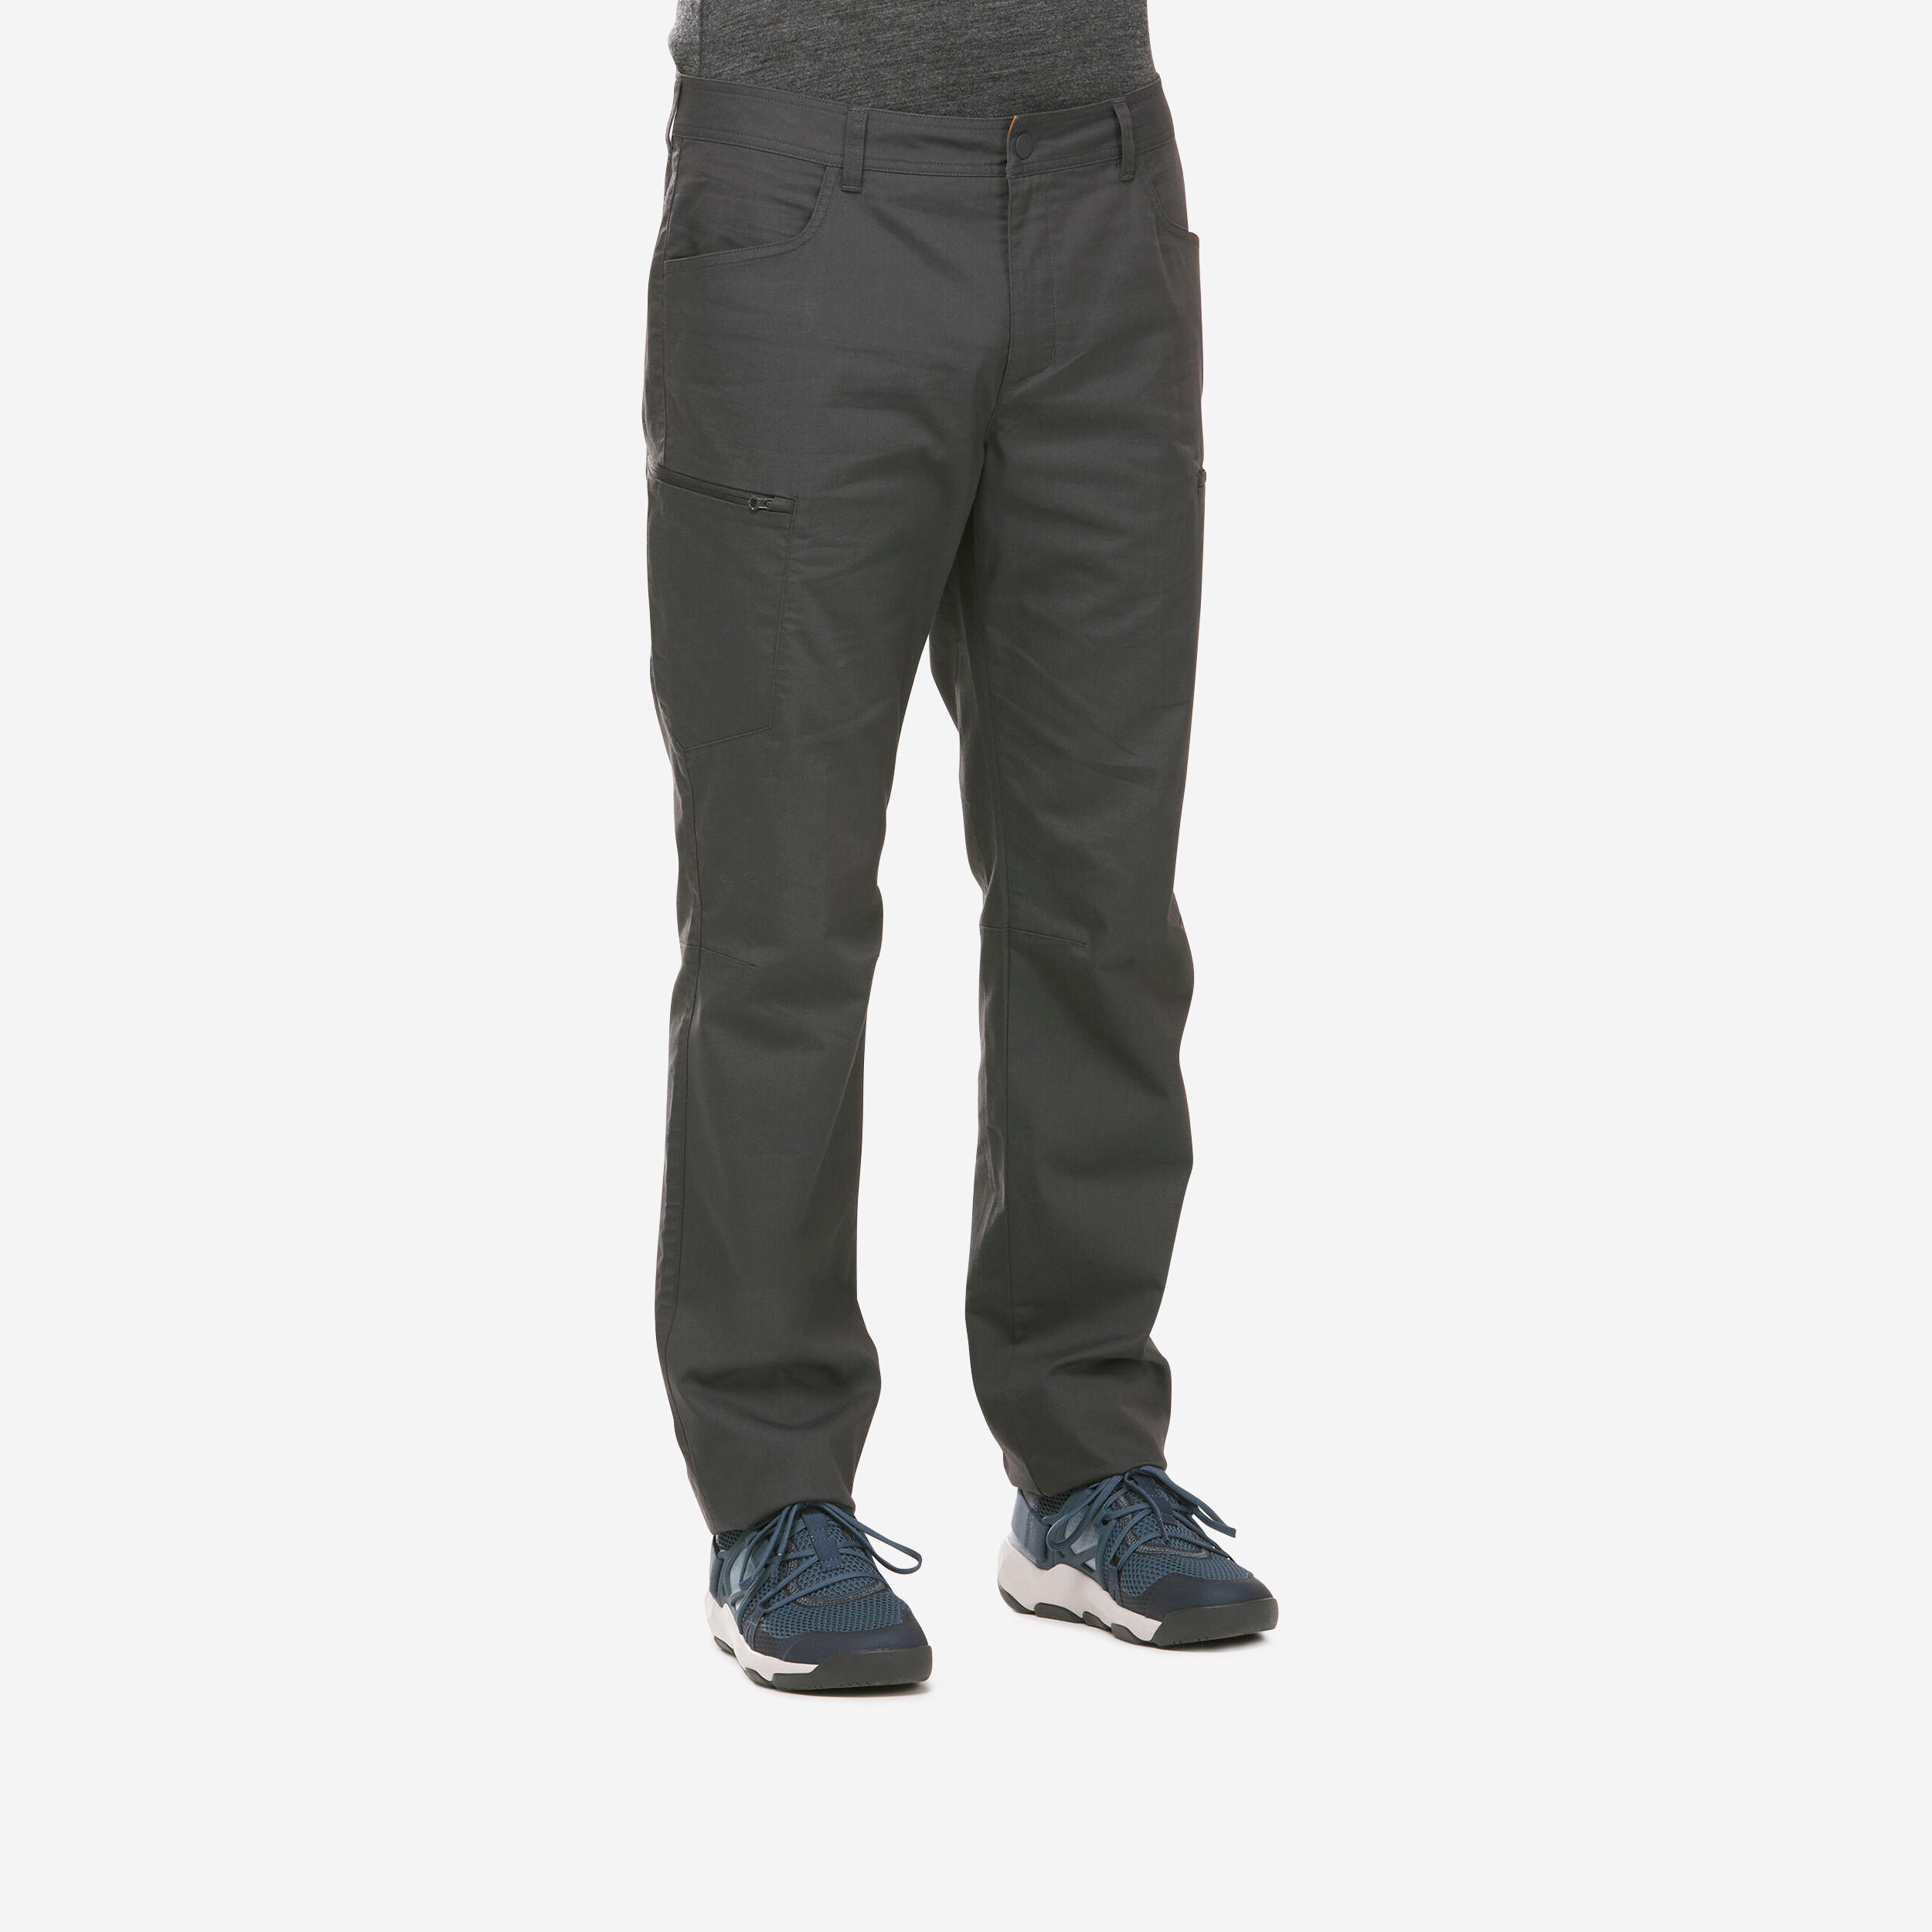 Side Slit Cargo Pants in Black Stretch Double Faced Wool